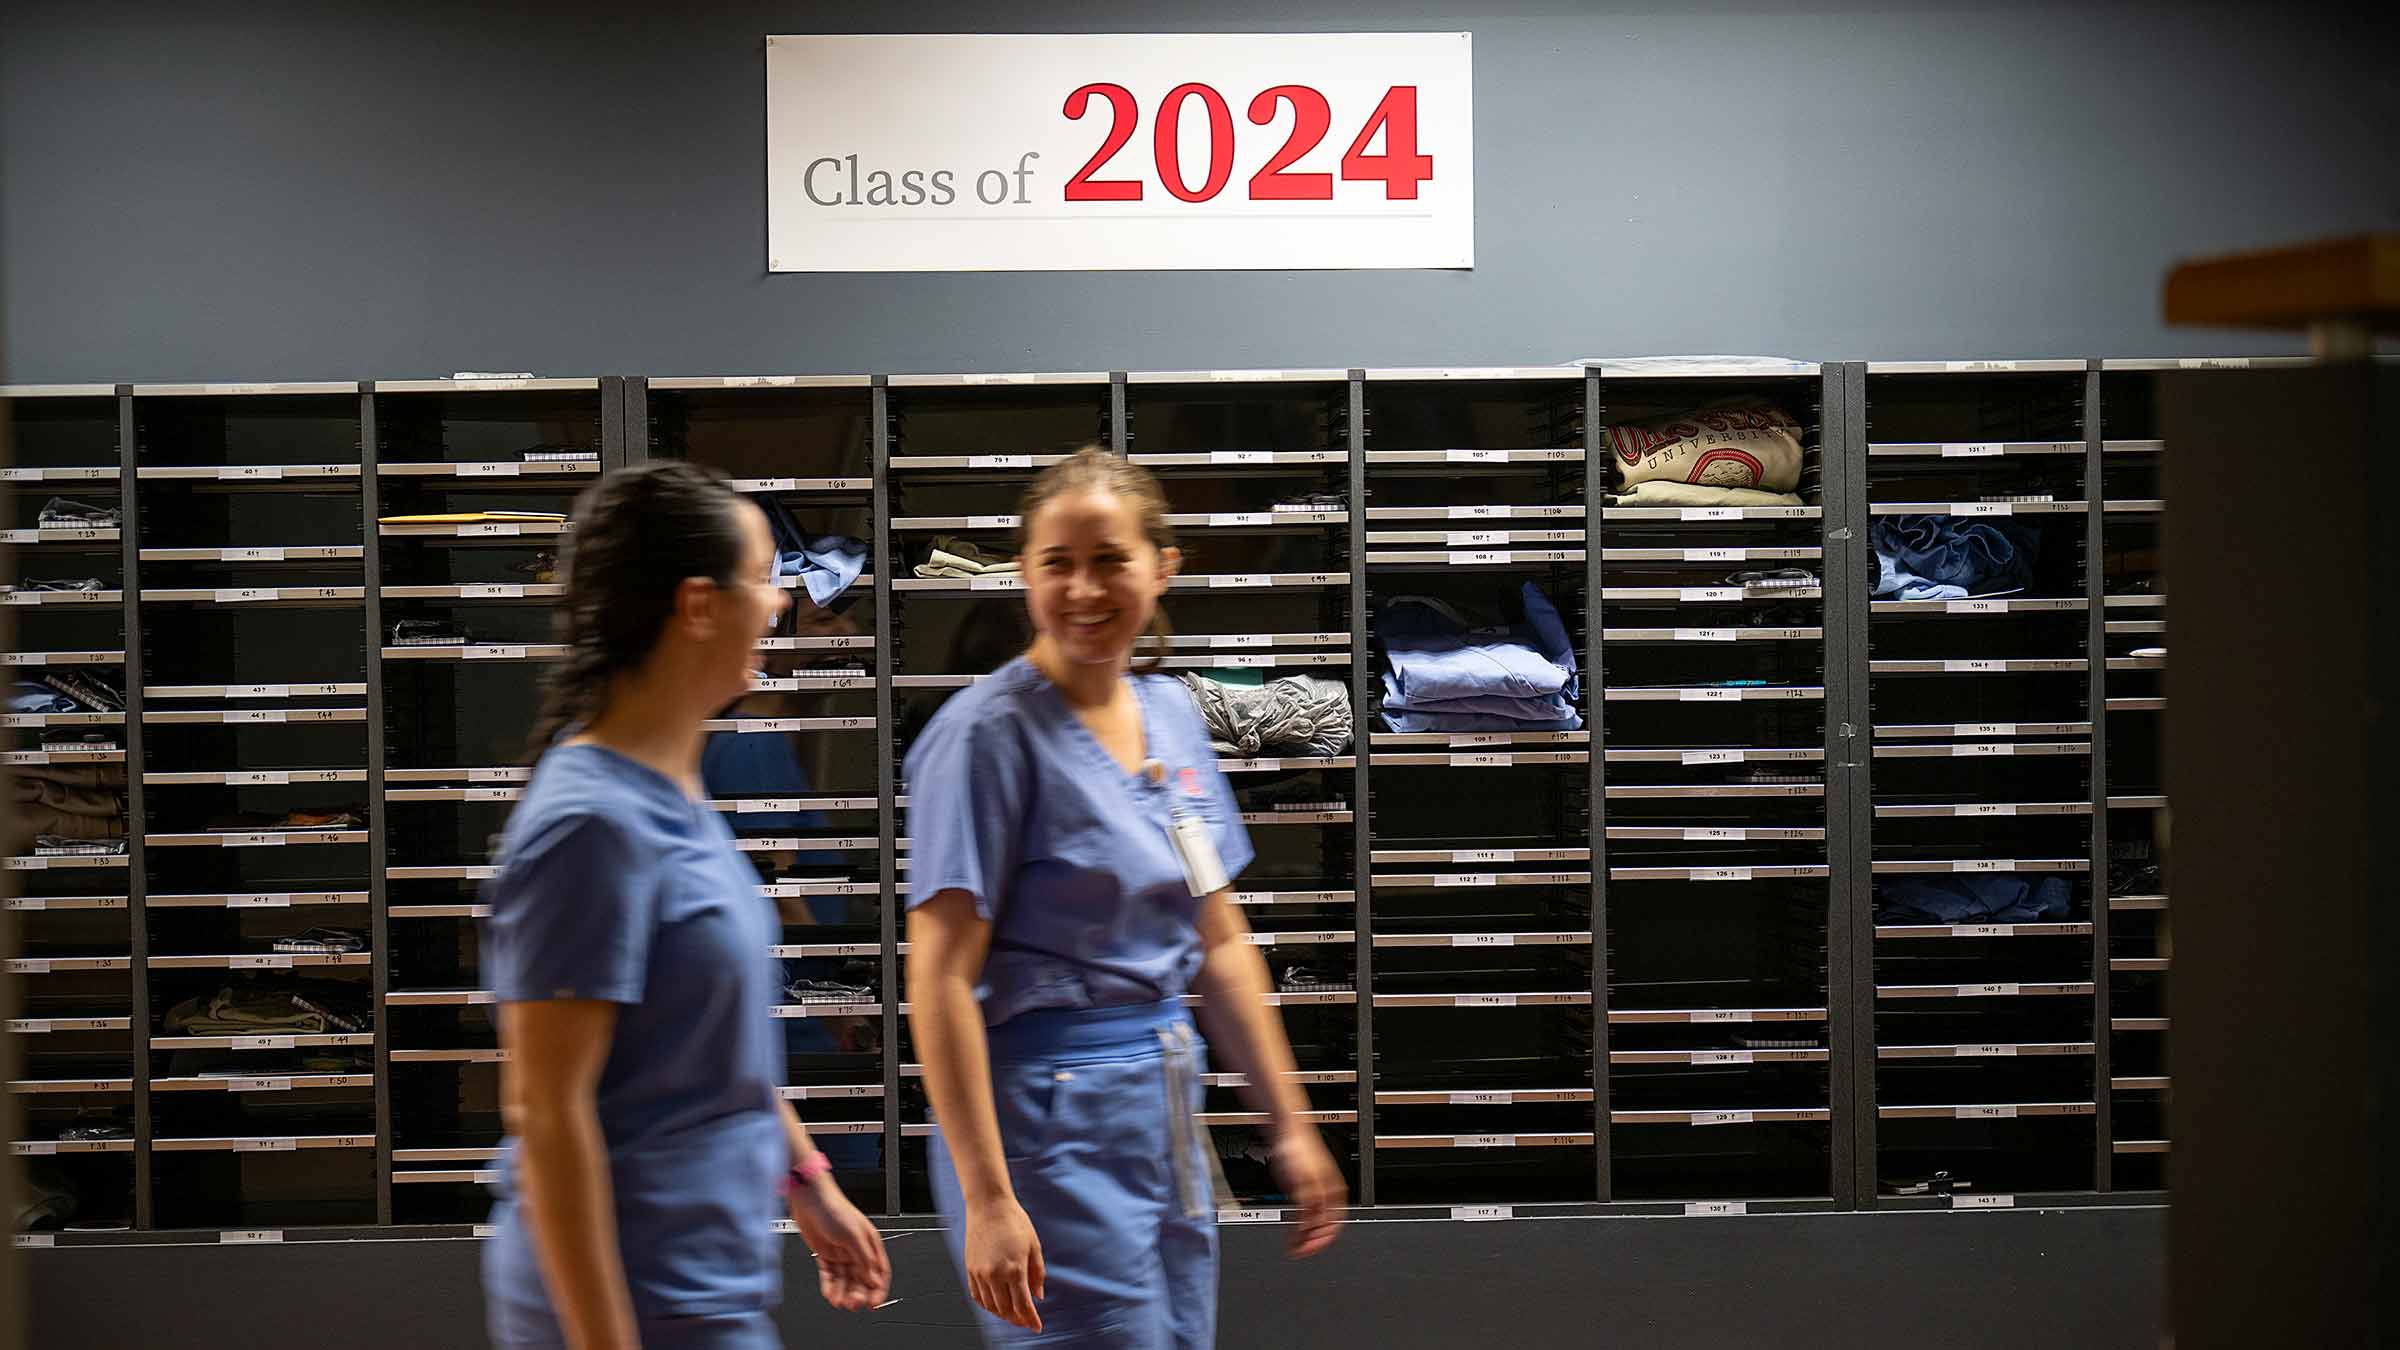 Students walking past "Class of 2024" sign